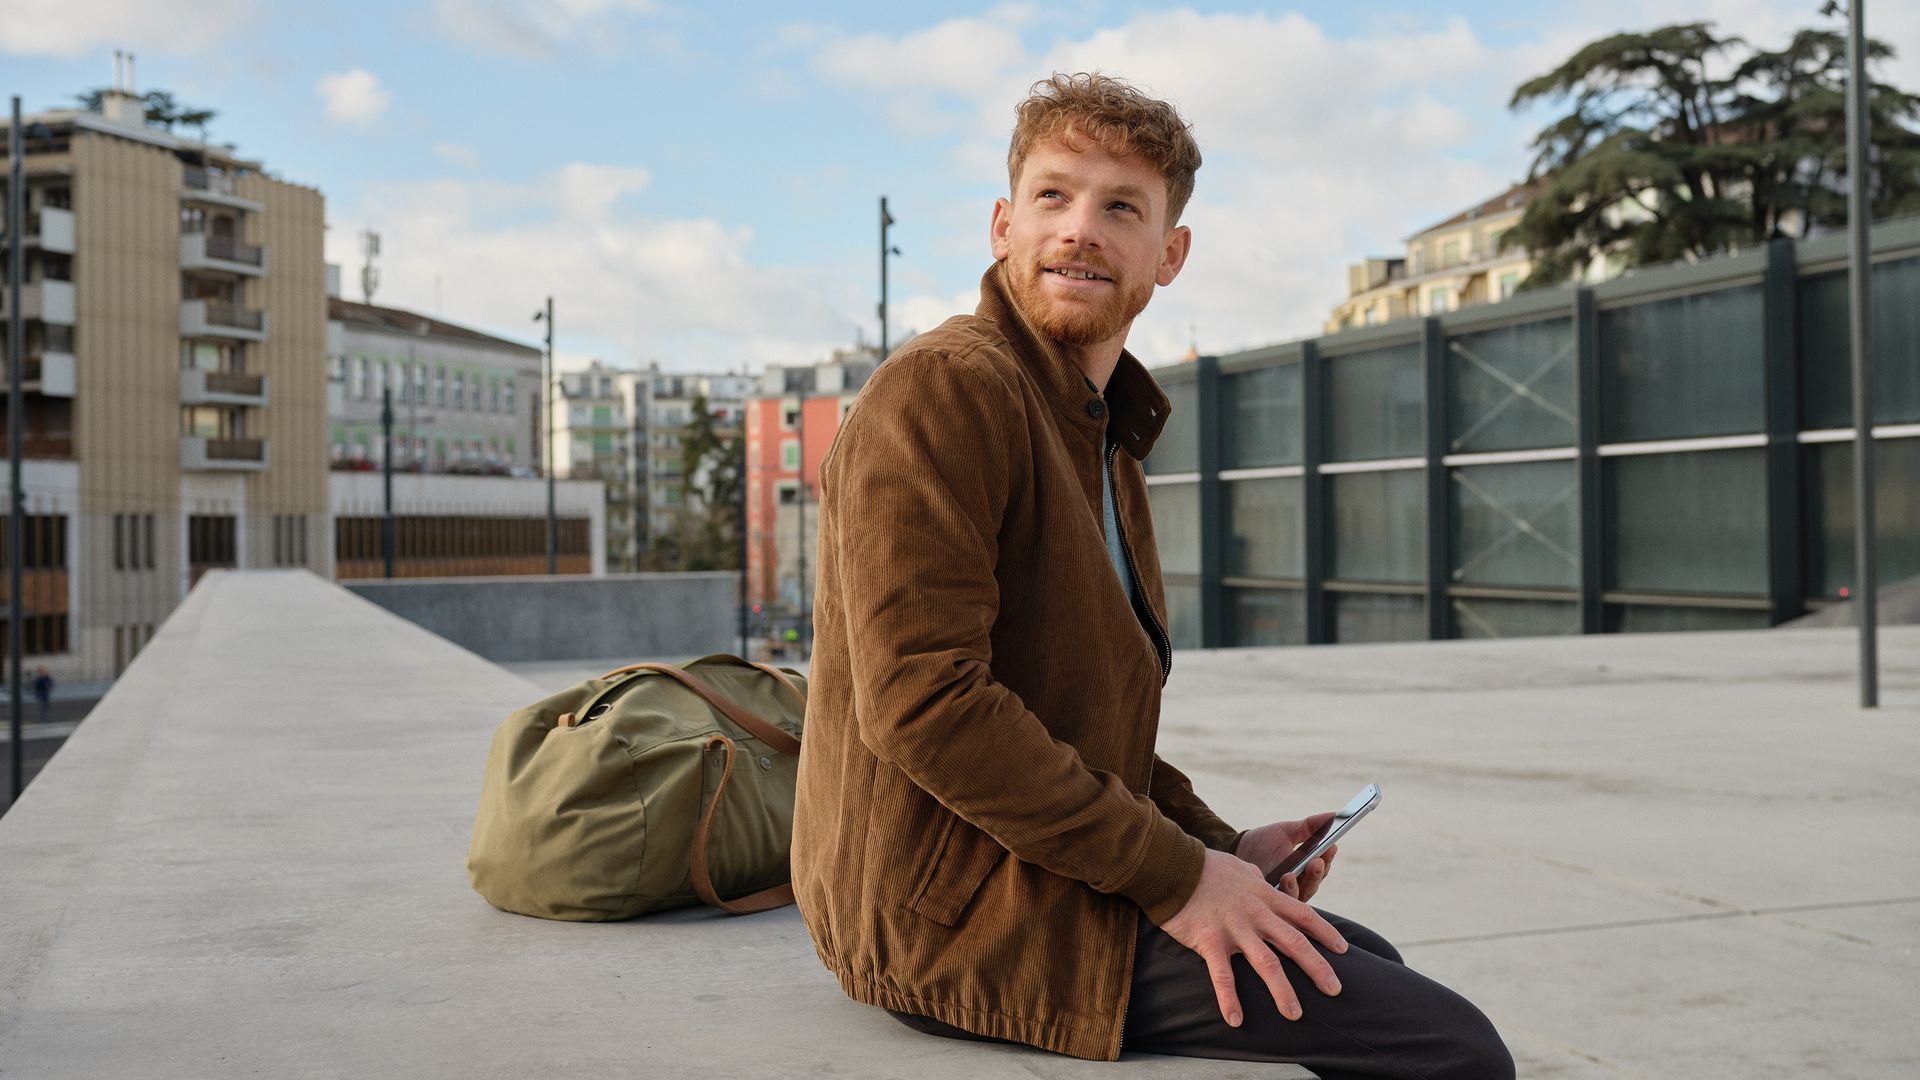 A traveller in a brown jacket sits on a wall in front of the station and has a mobile phone in his hand.